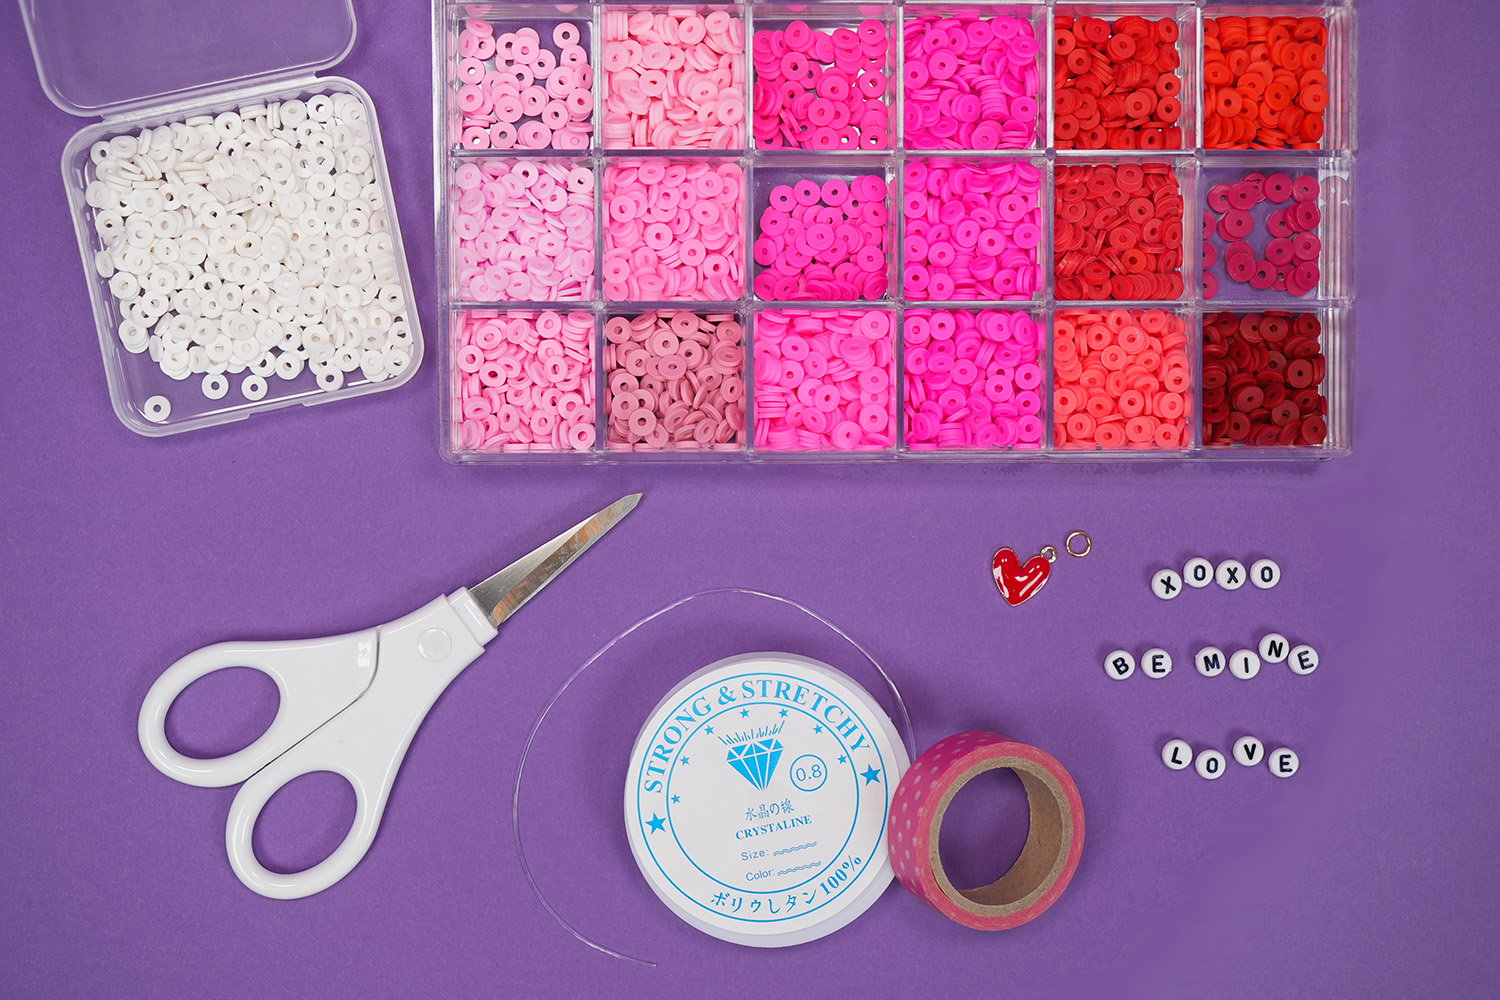 Supplies for beaded Valentine's Day bracelets on purple background - beads, scissors, string, etc.